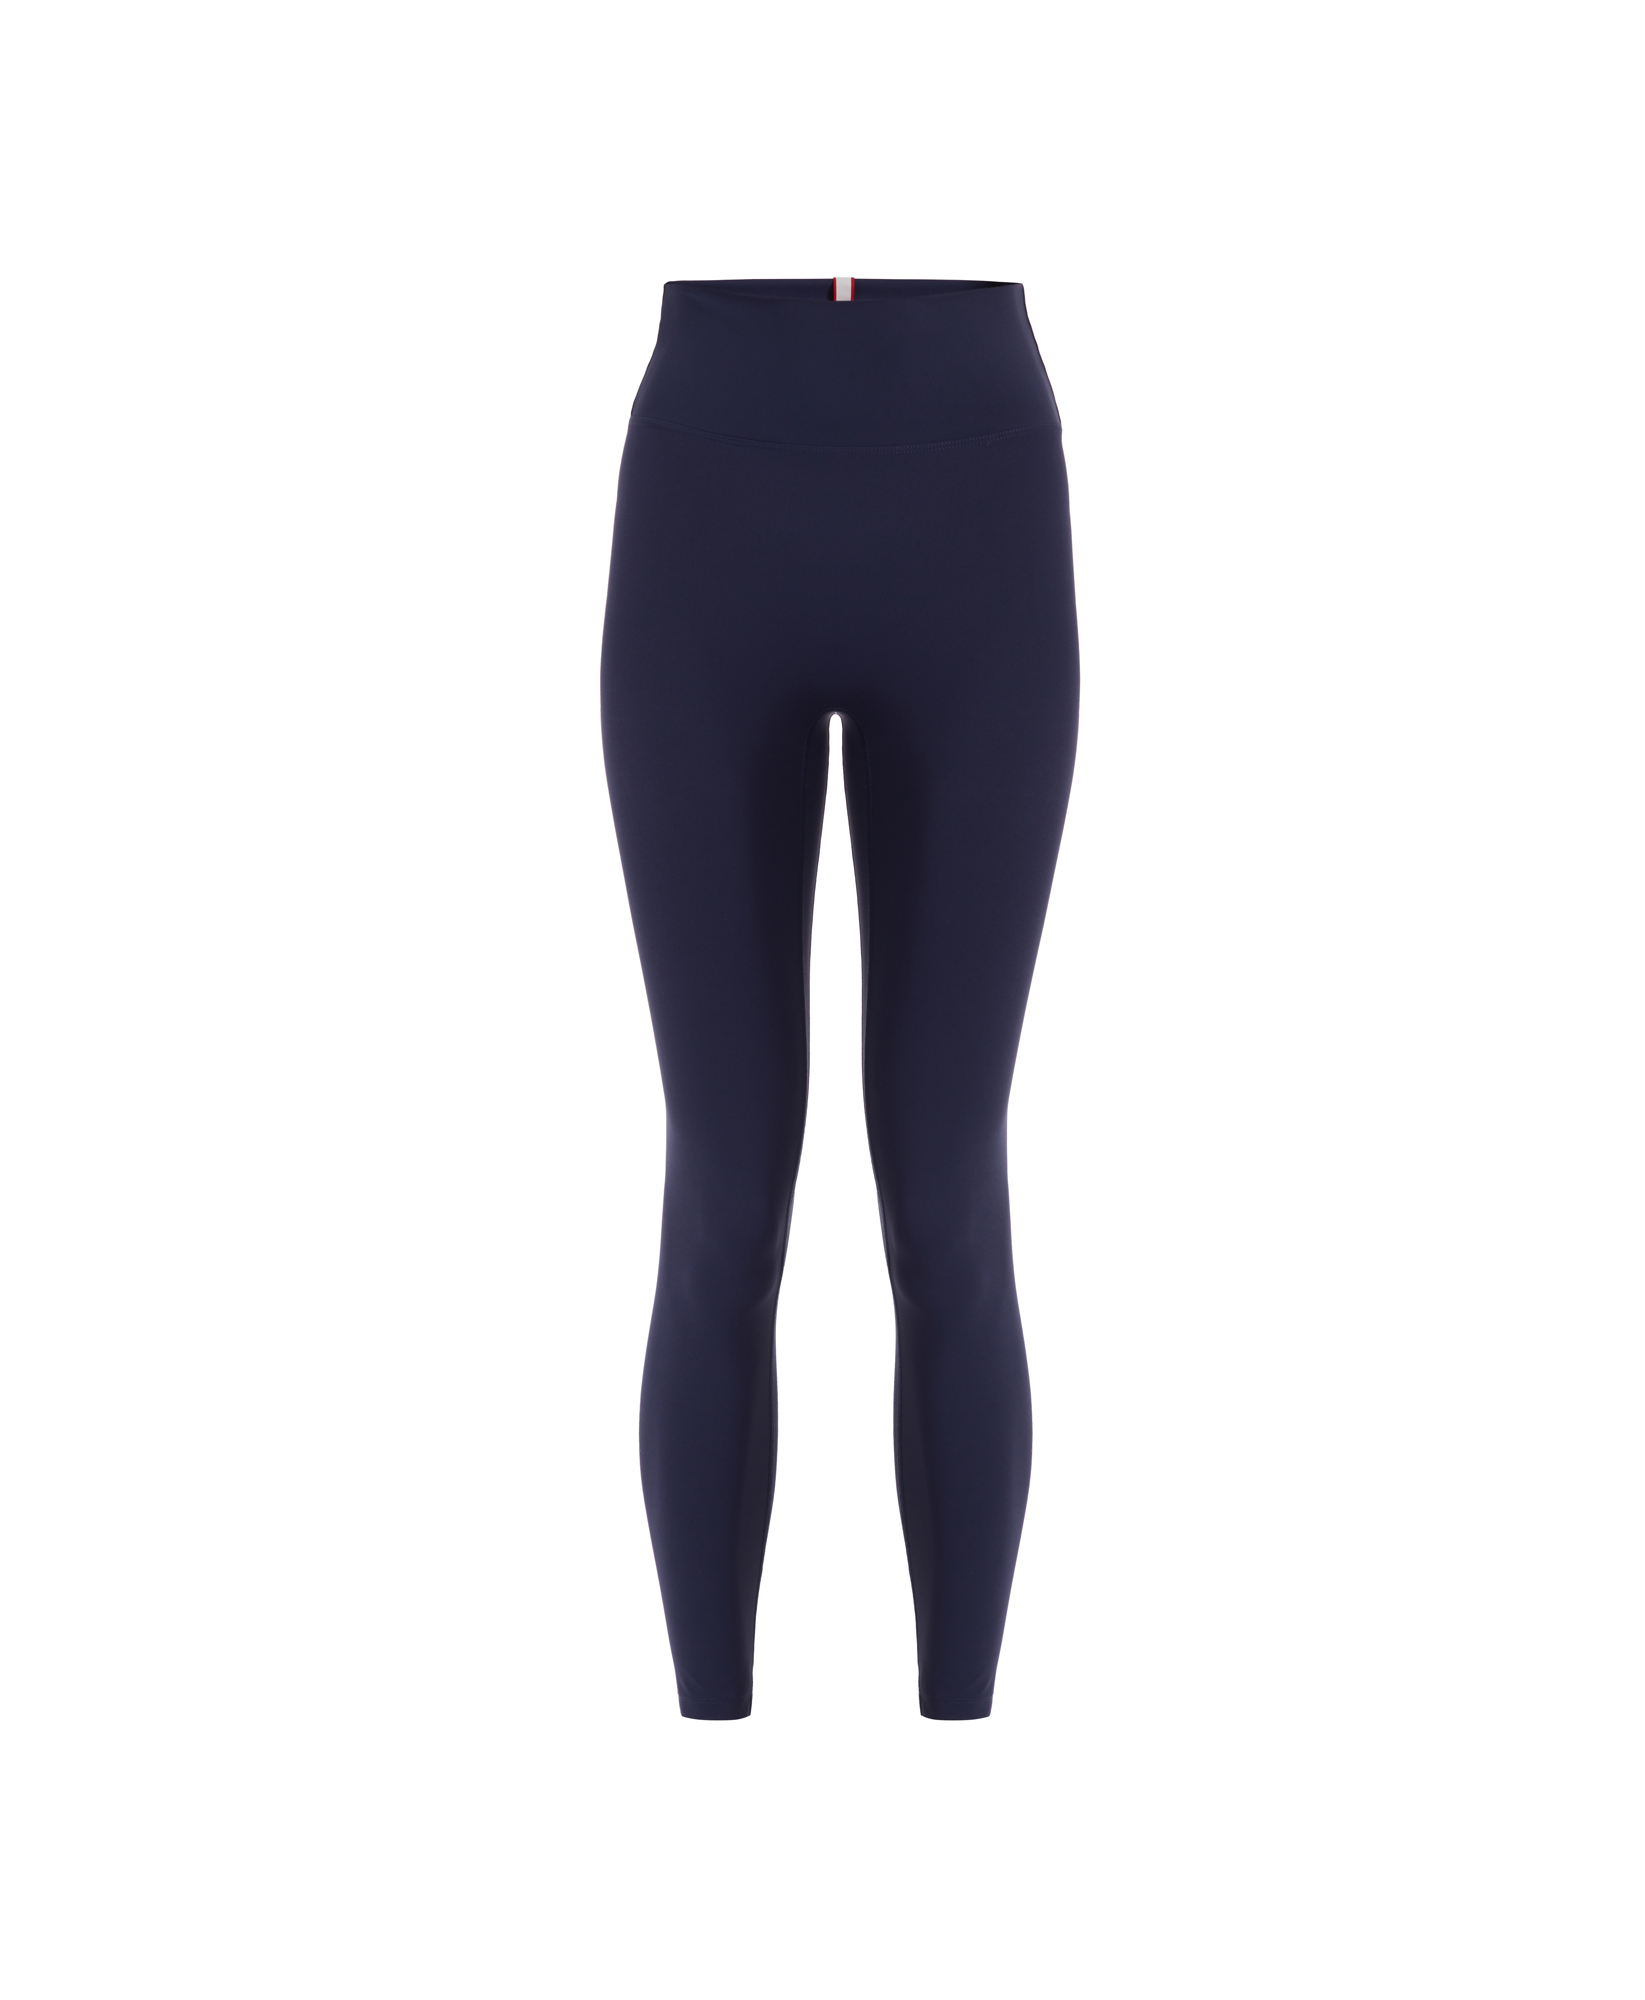 Wear One's At Routine Legging in Navy on model kicking leg out full front view